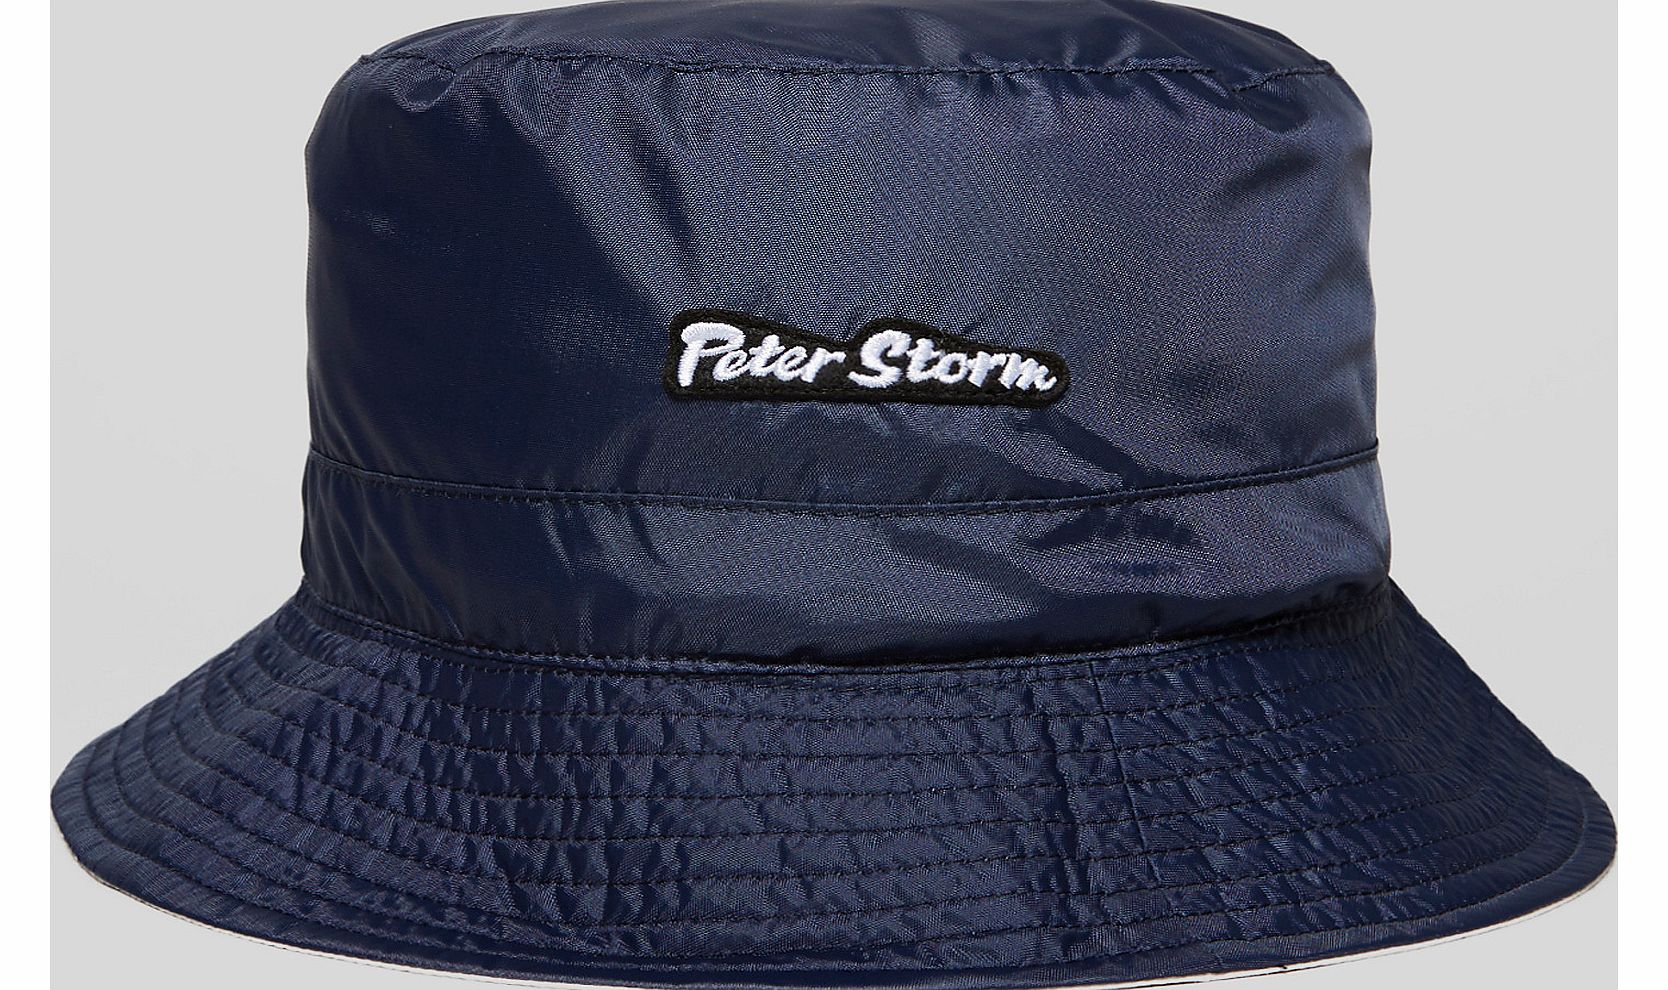 Peter Storm Made in the UK Bucket Hat